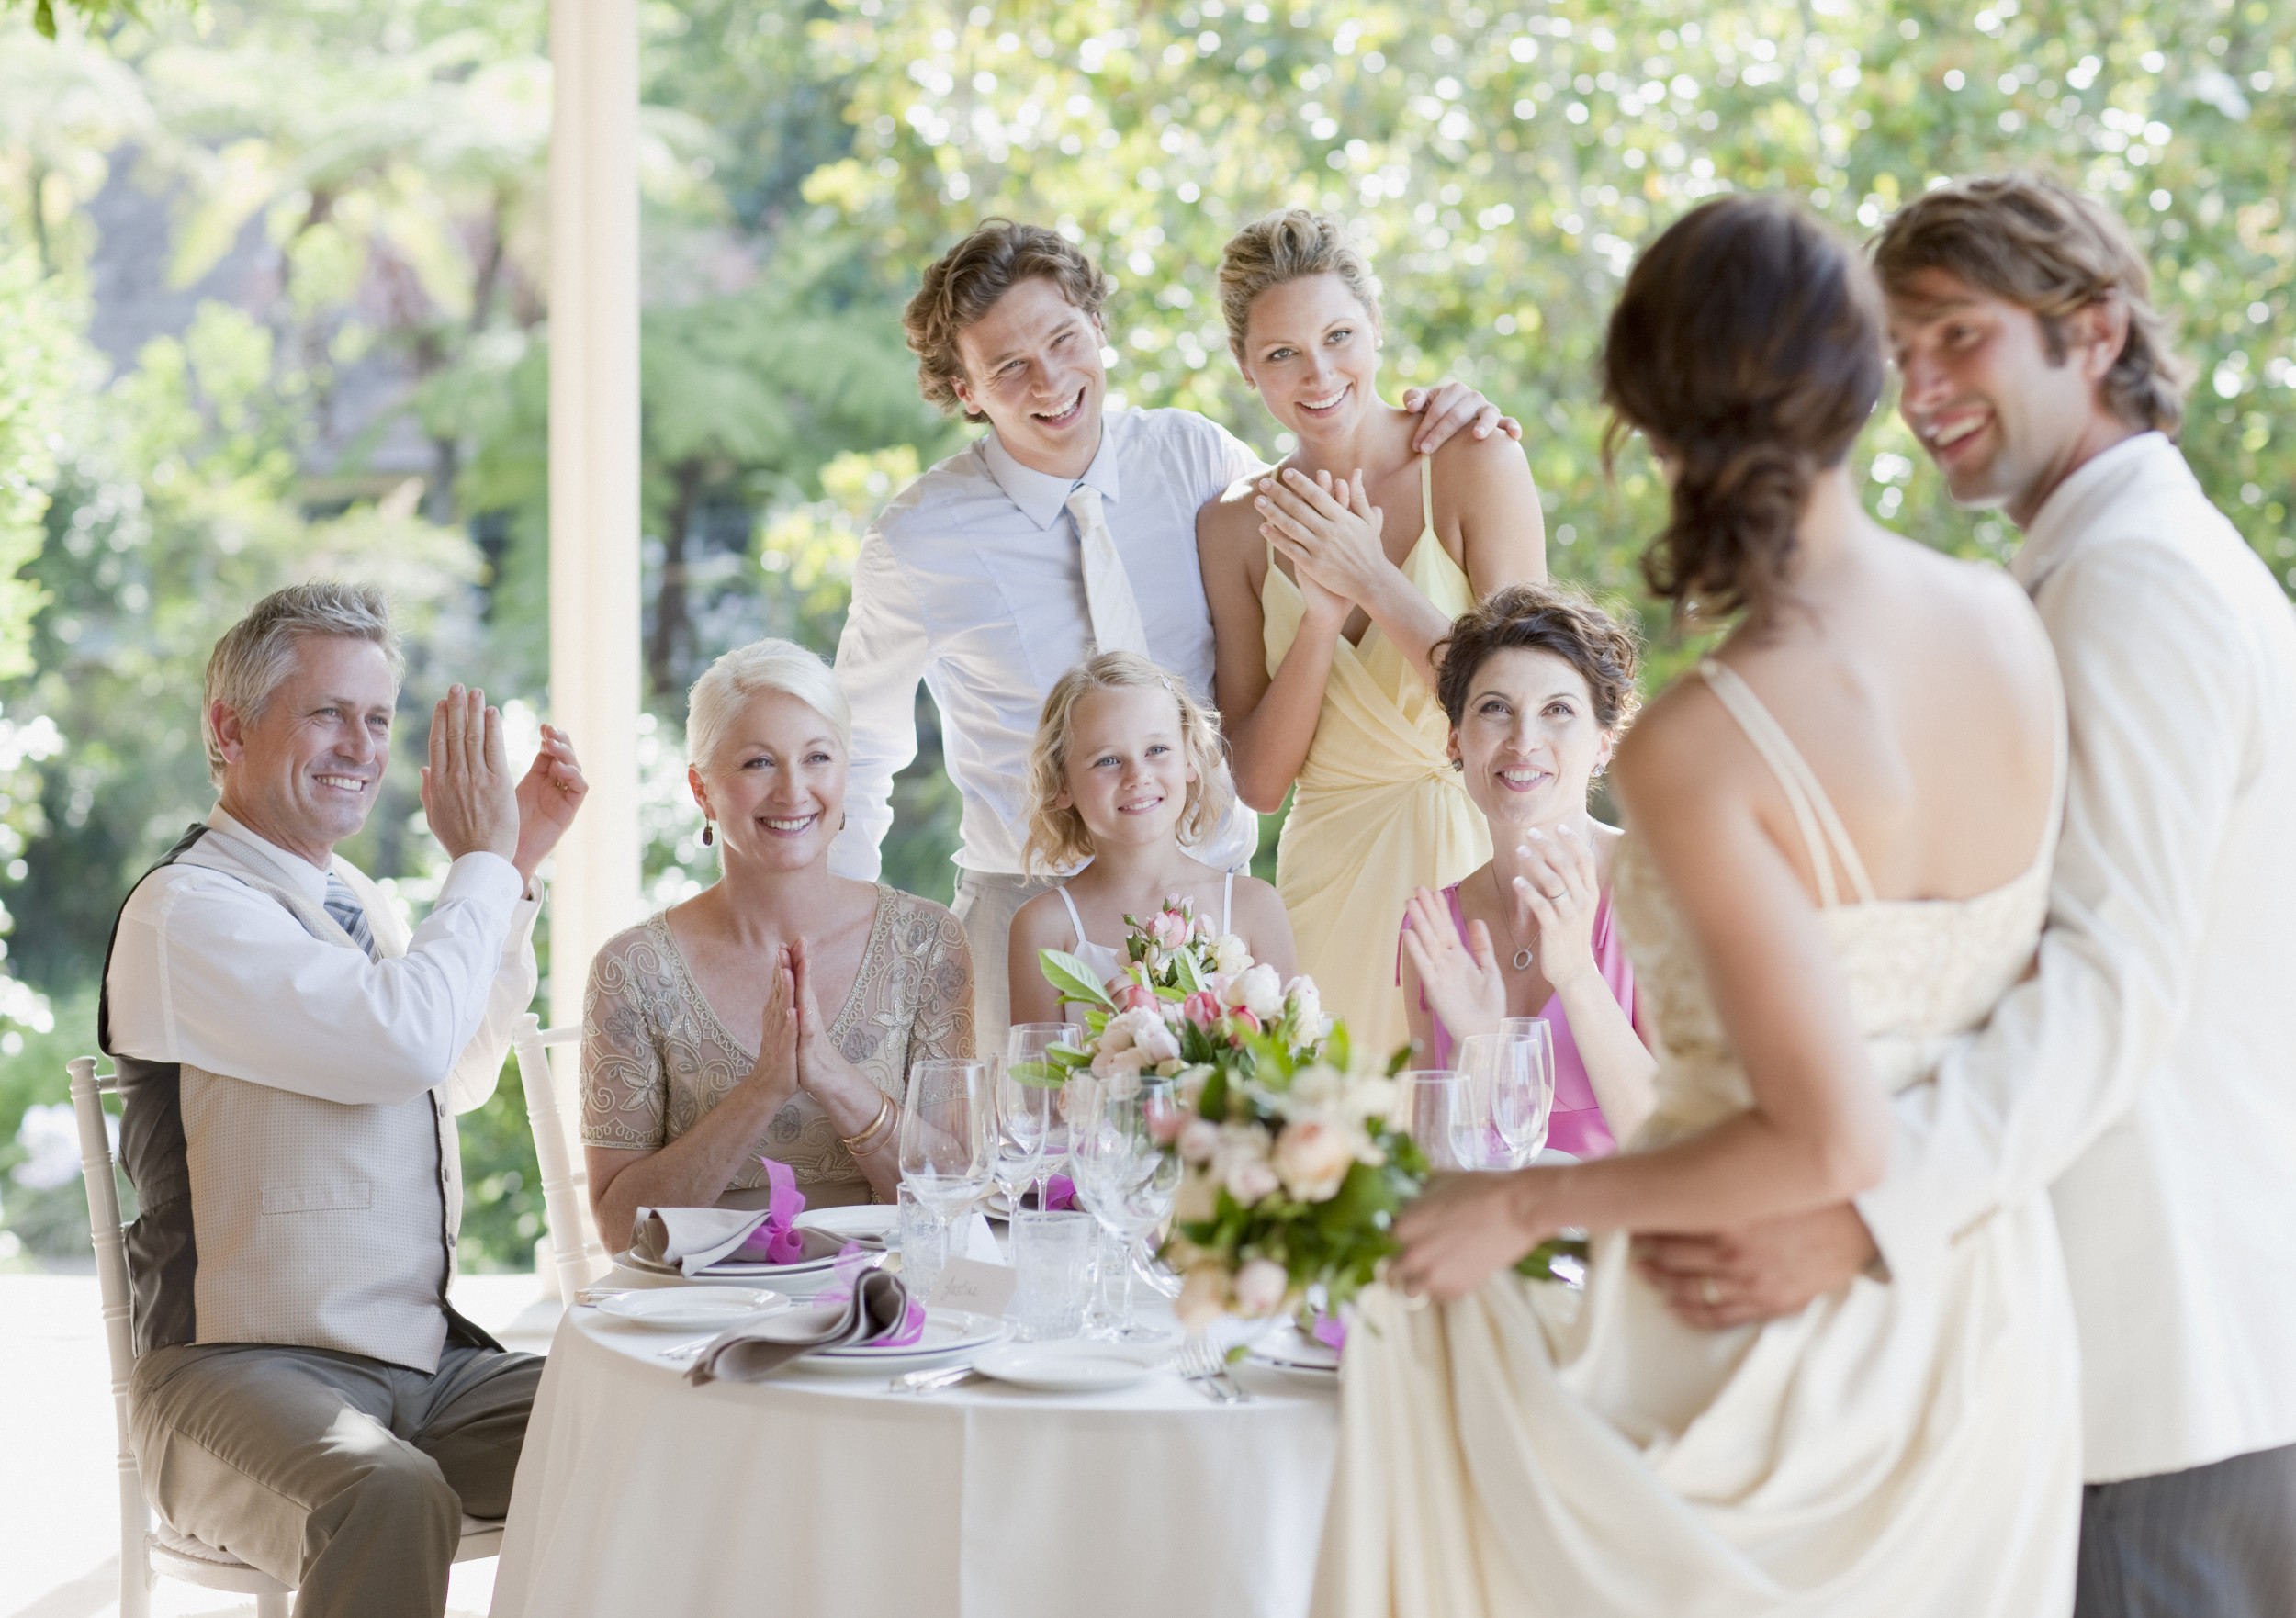 How Many People Should I Invite to My Wedding? How to Estimate Costs